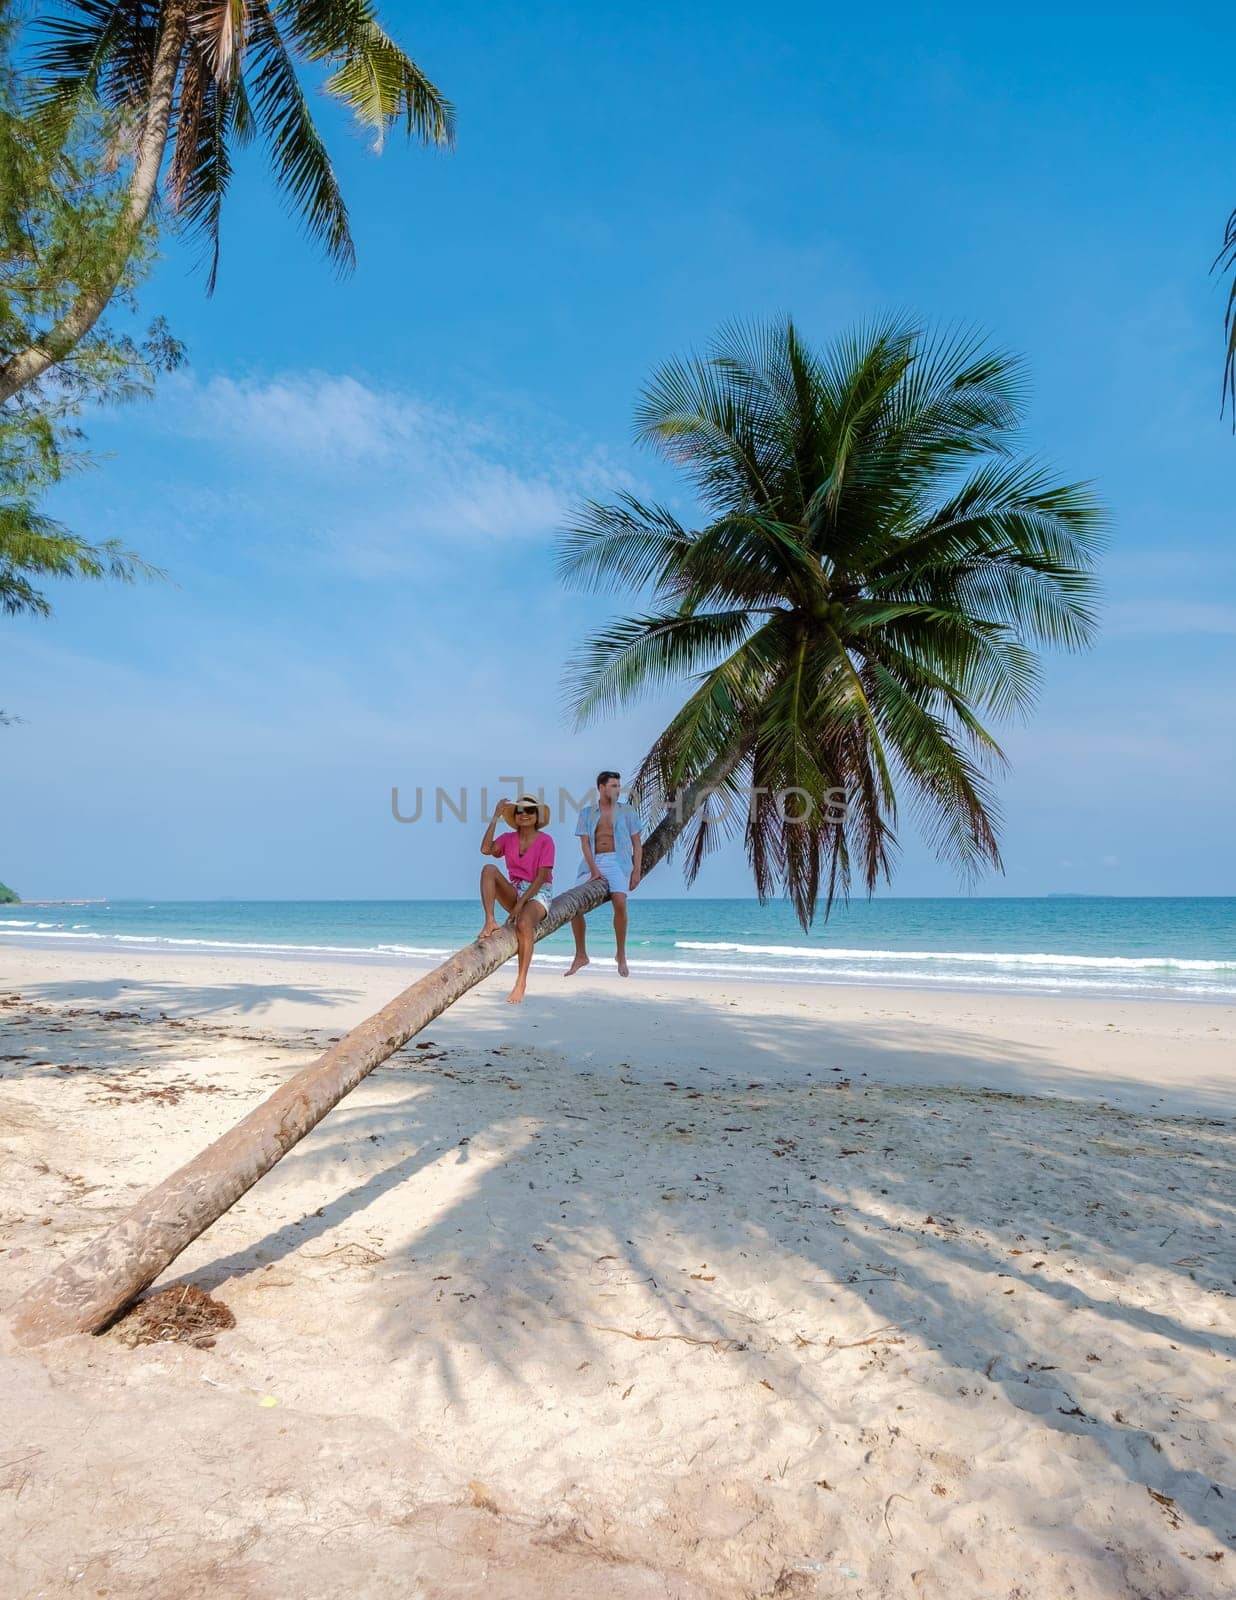 couple on vacation in Thailand Chumphon province walking at a white tropical beach with palm trees, Wua Laen beach Chumphon Thailand, palm tree hanging over the beach